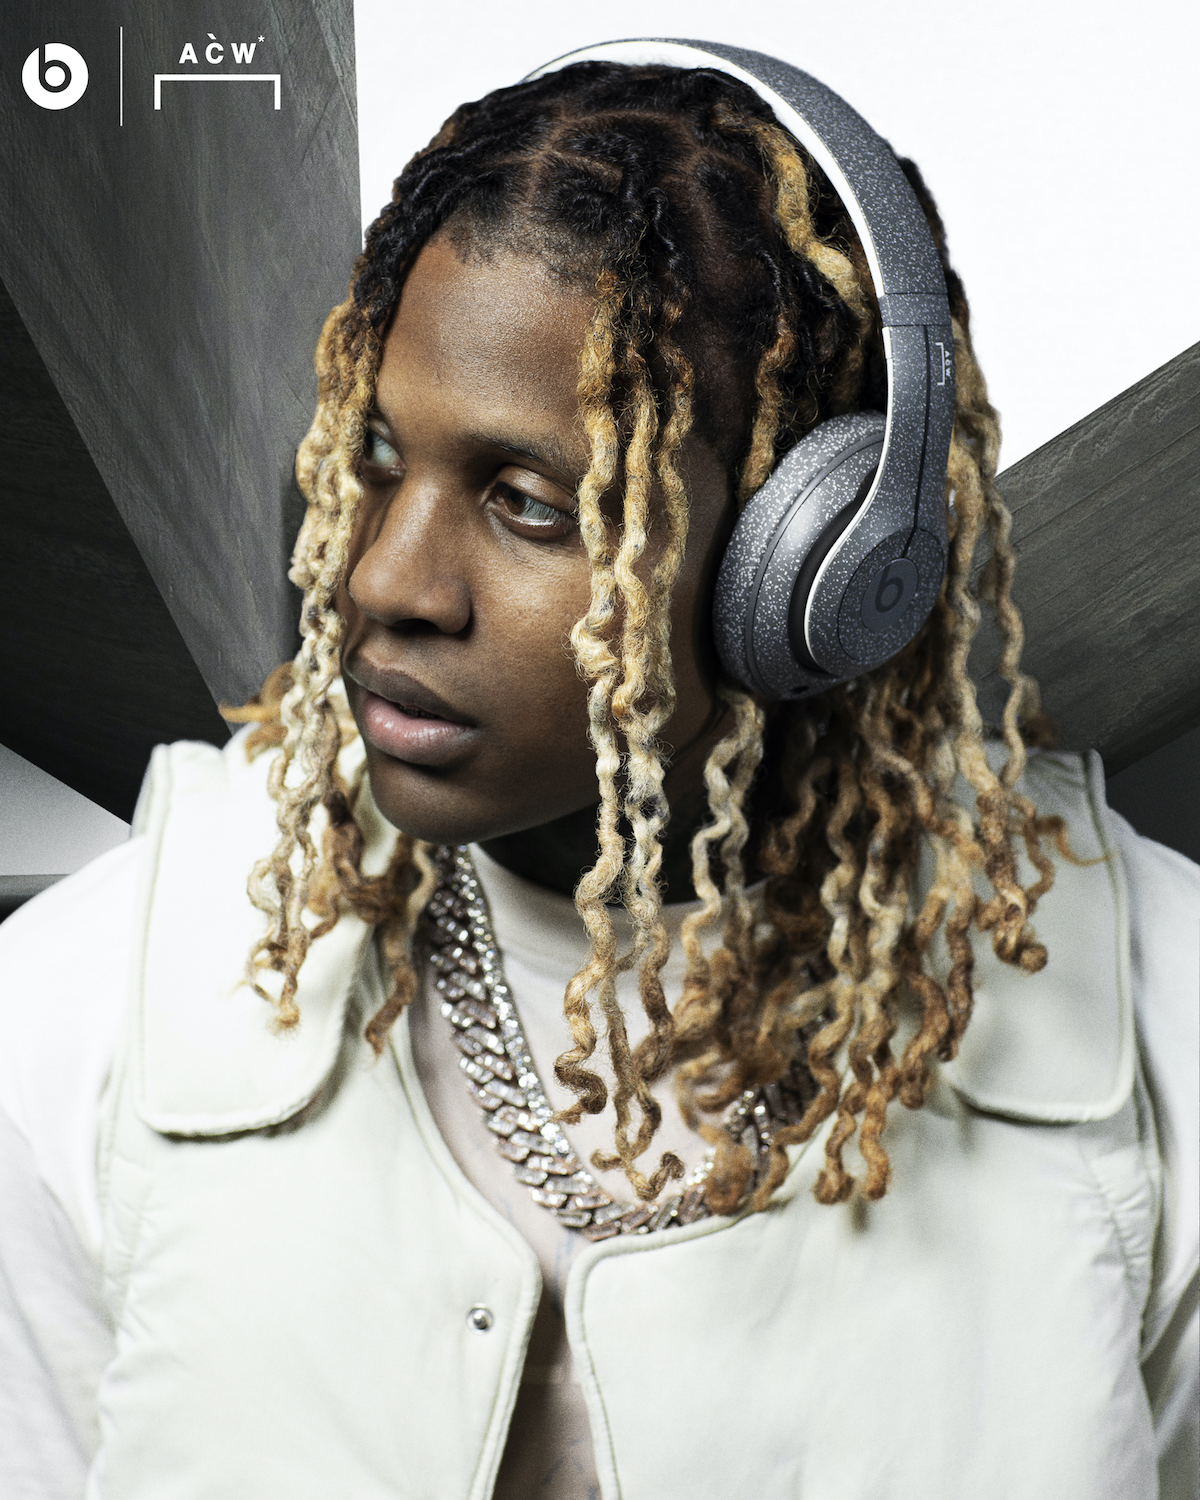 indad mad buket A-COLD-WALL* Debut DRE BEATS Collaboration – PAUSE Online | Men's Fashion,  Street Style, Fashion News & Streetwear